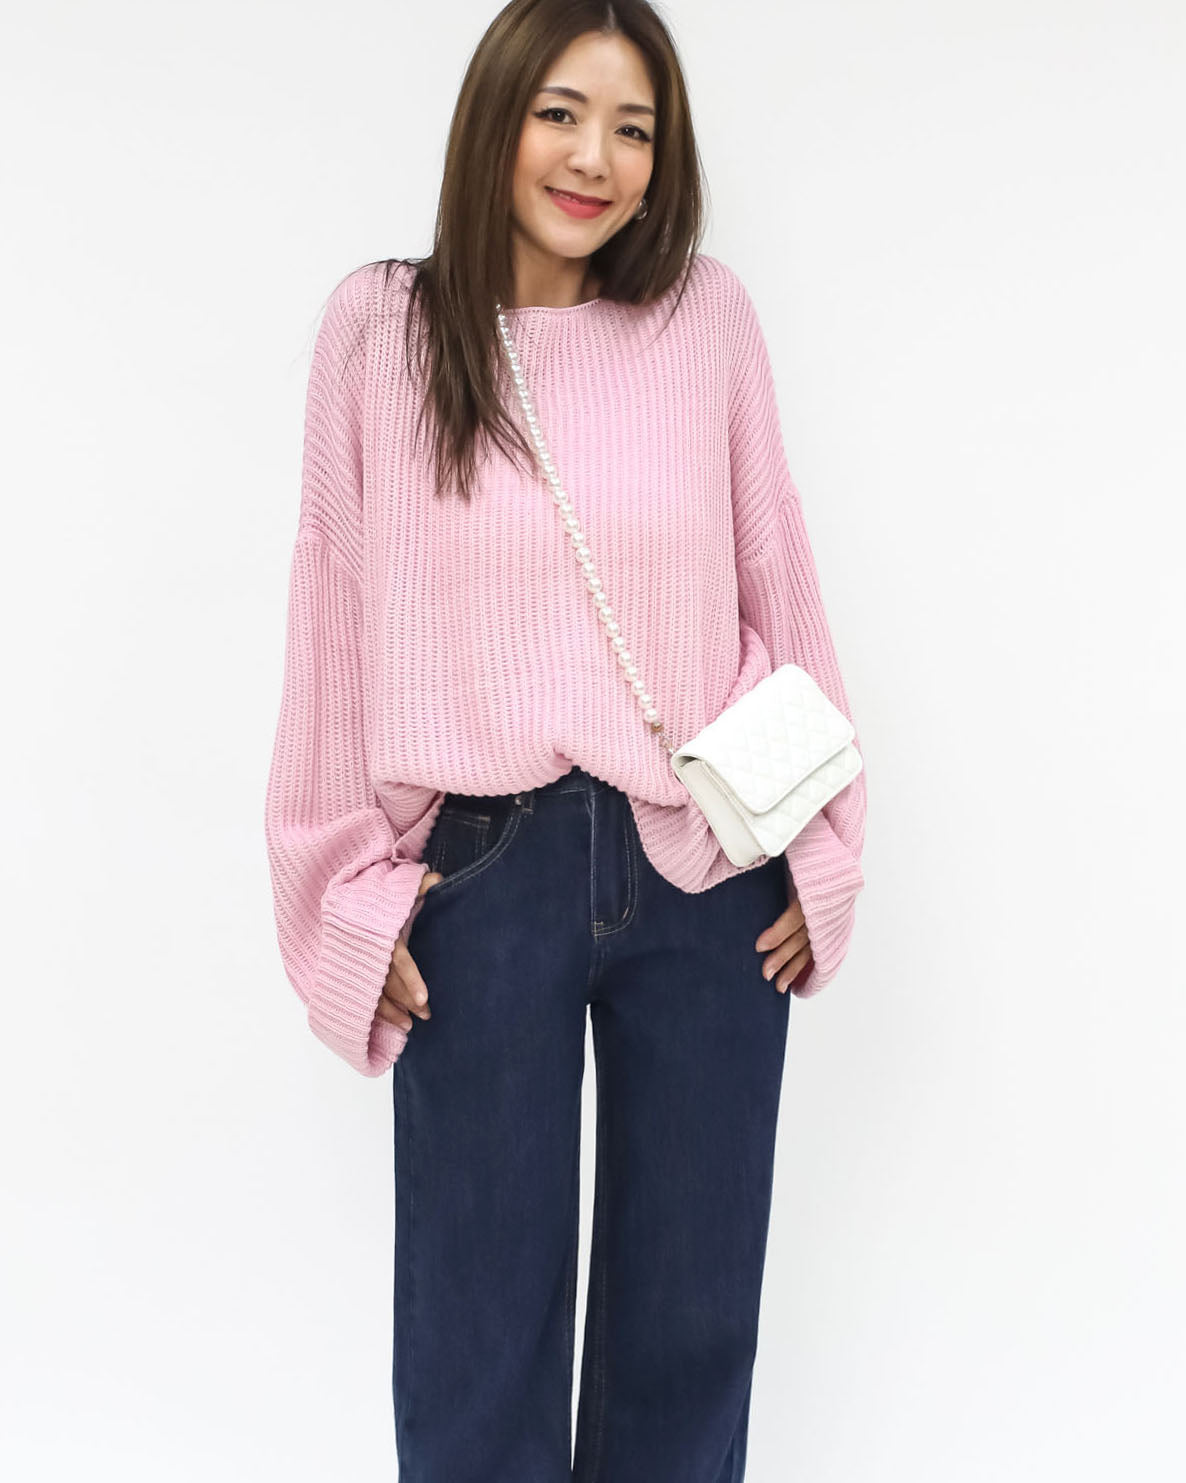 pink casual knitted top *pre-order*